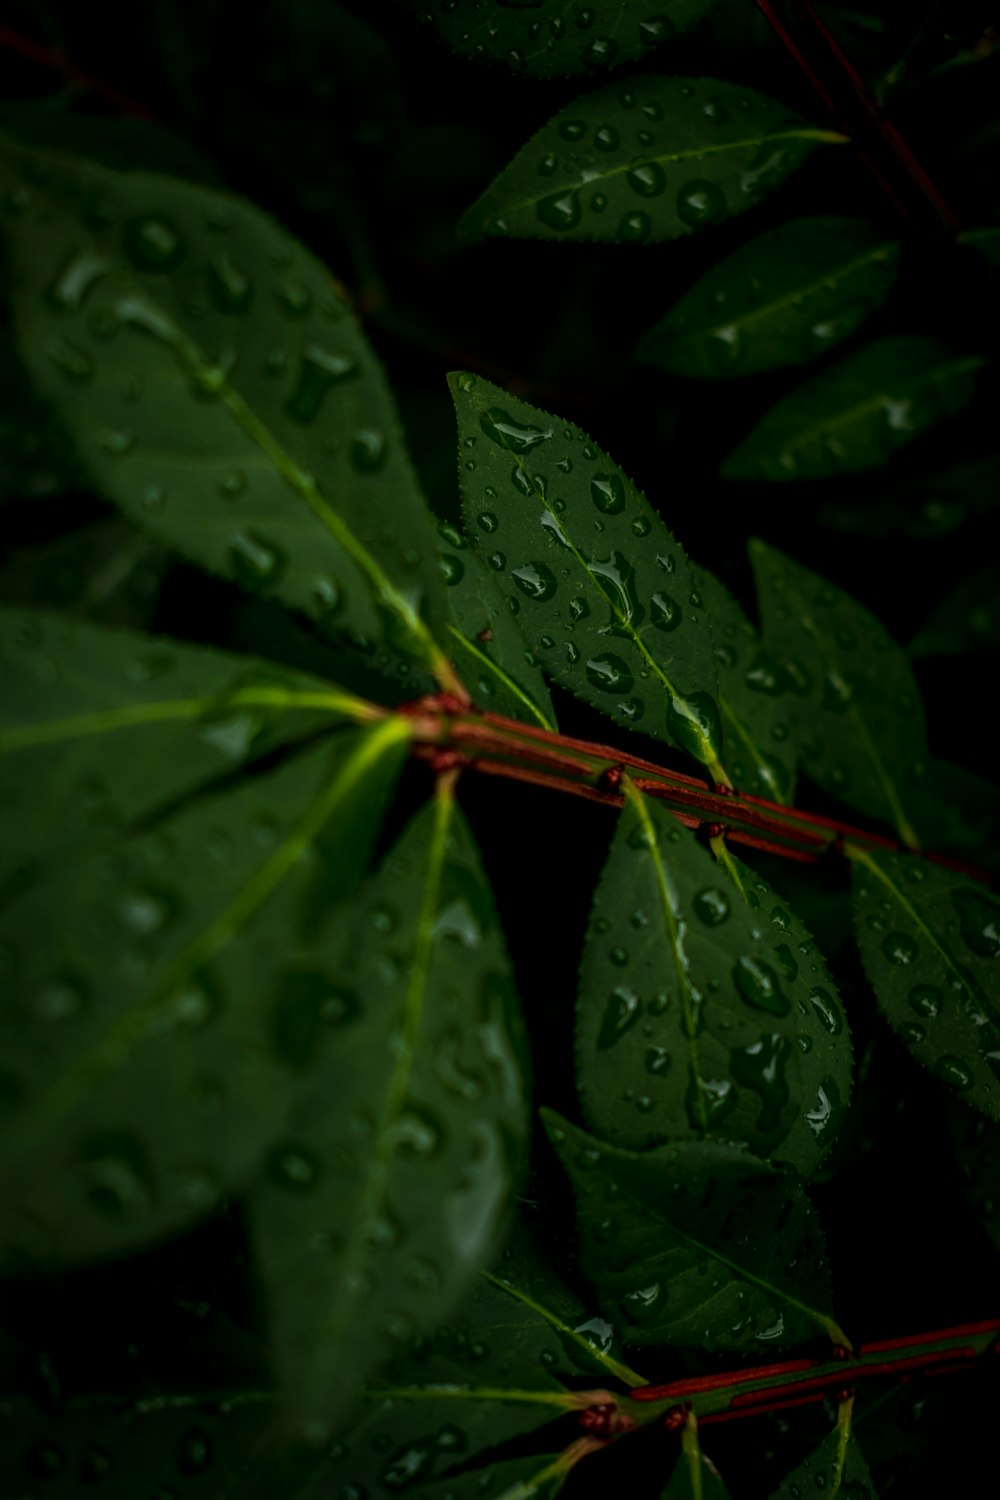 a close-up of water droplets on a leaf